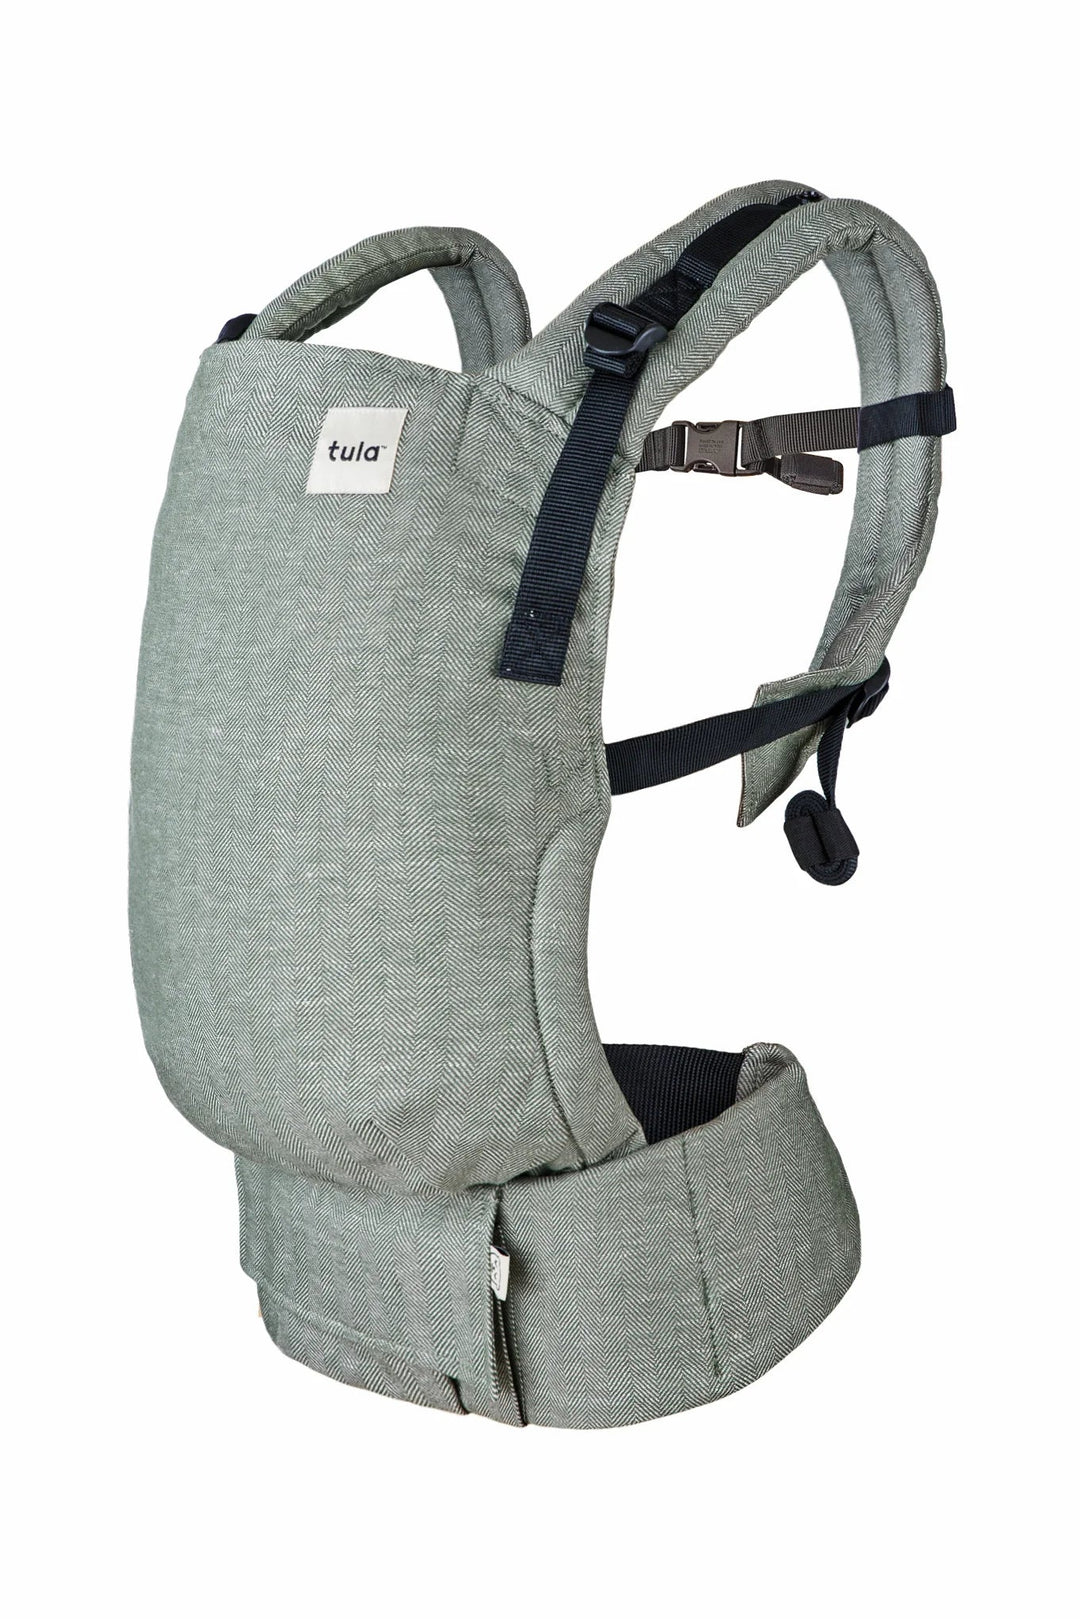 Tula Free-To-Grow Baby Carrier Linen Spruce